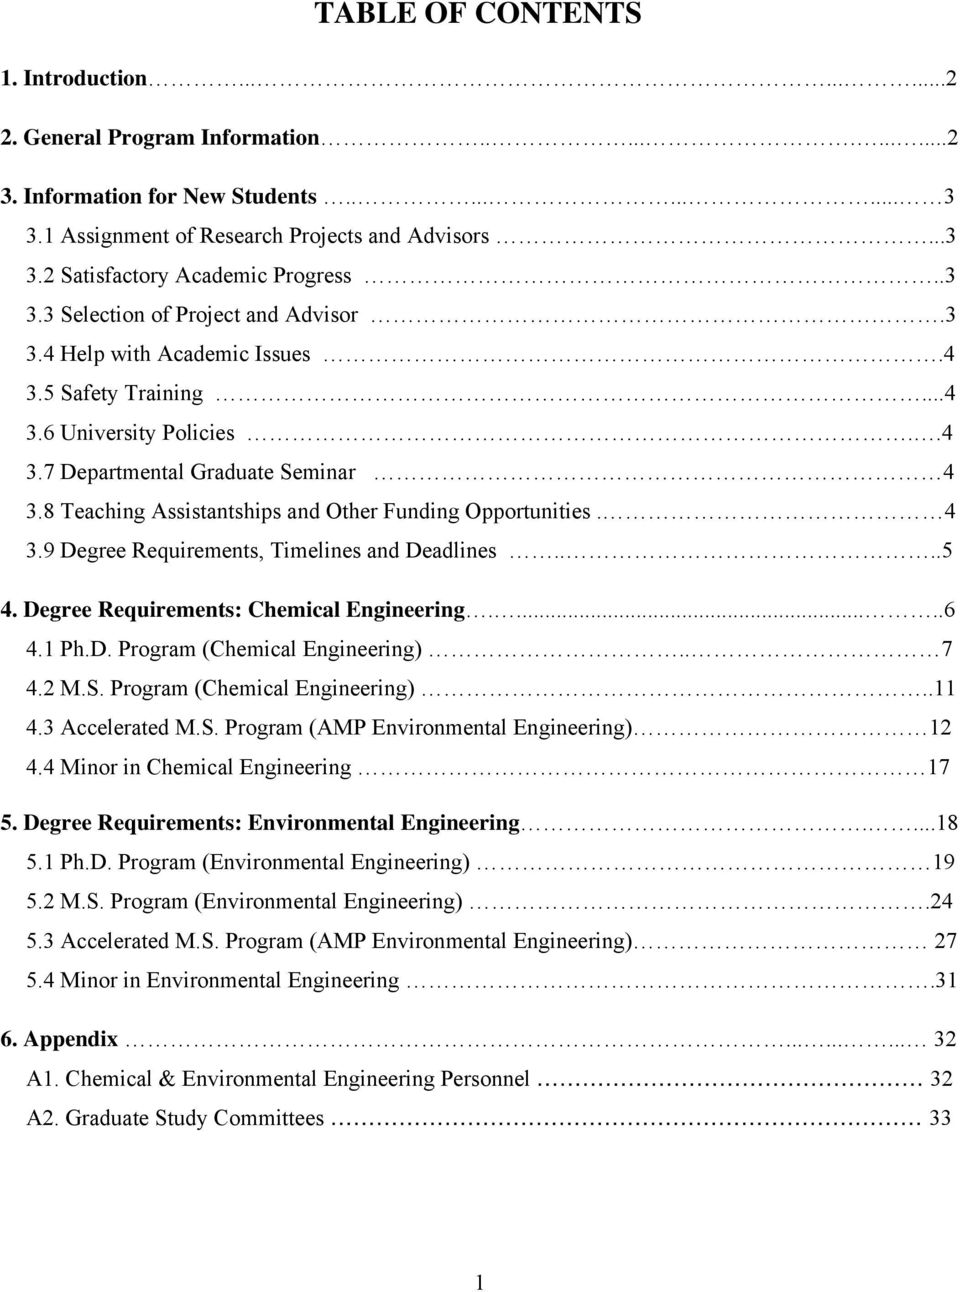 8 Teaching Assistantships and Other Funding Opportunities. 4 3.9 Degree Requirements, Timelines and Deadlines....5 4. Degree Requirements: Chemical Engineering......6 4.1 Ph.D. Program (Chemical Engineering).